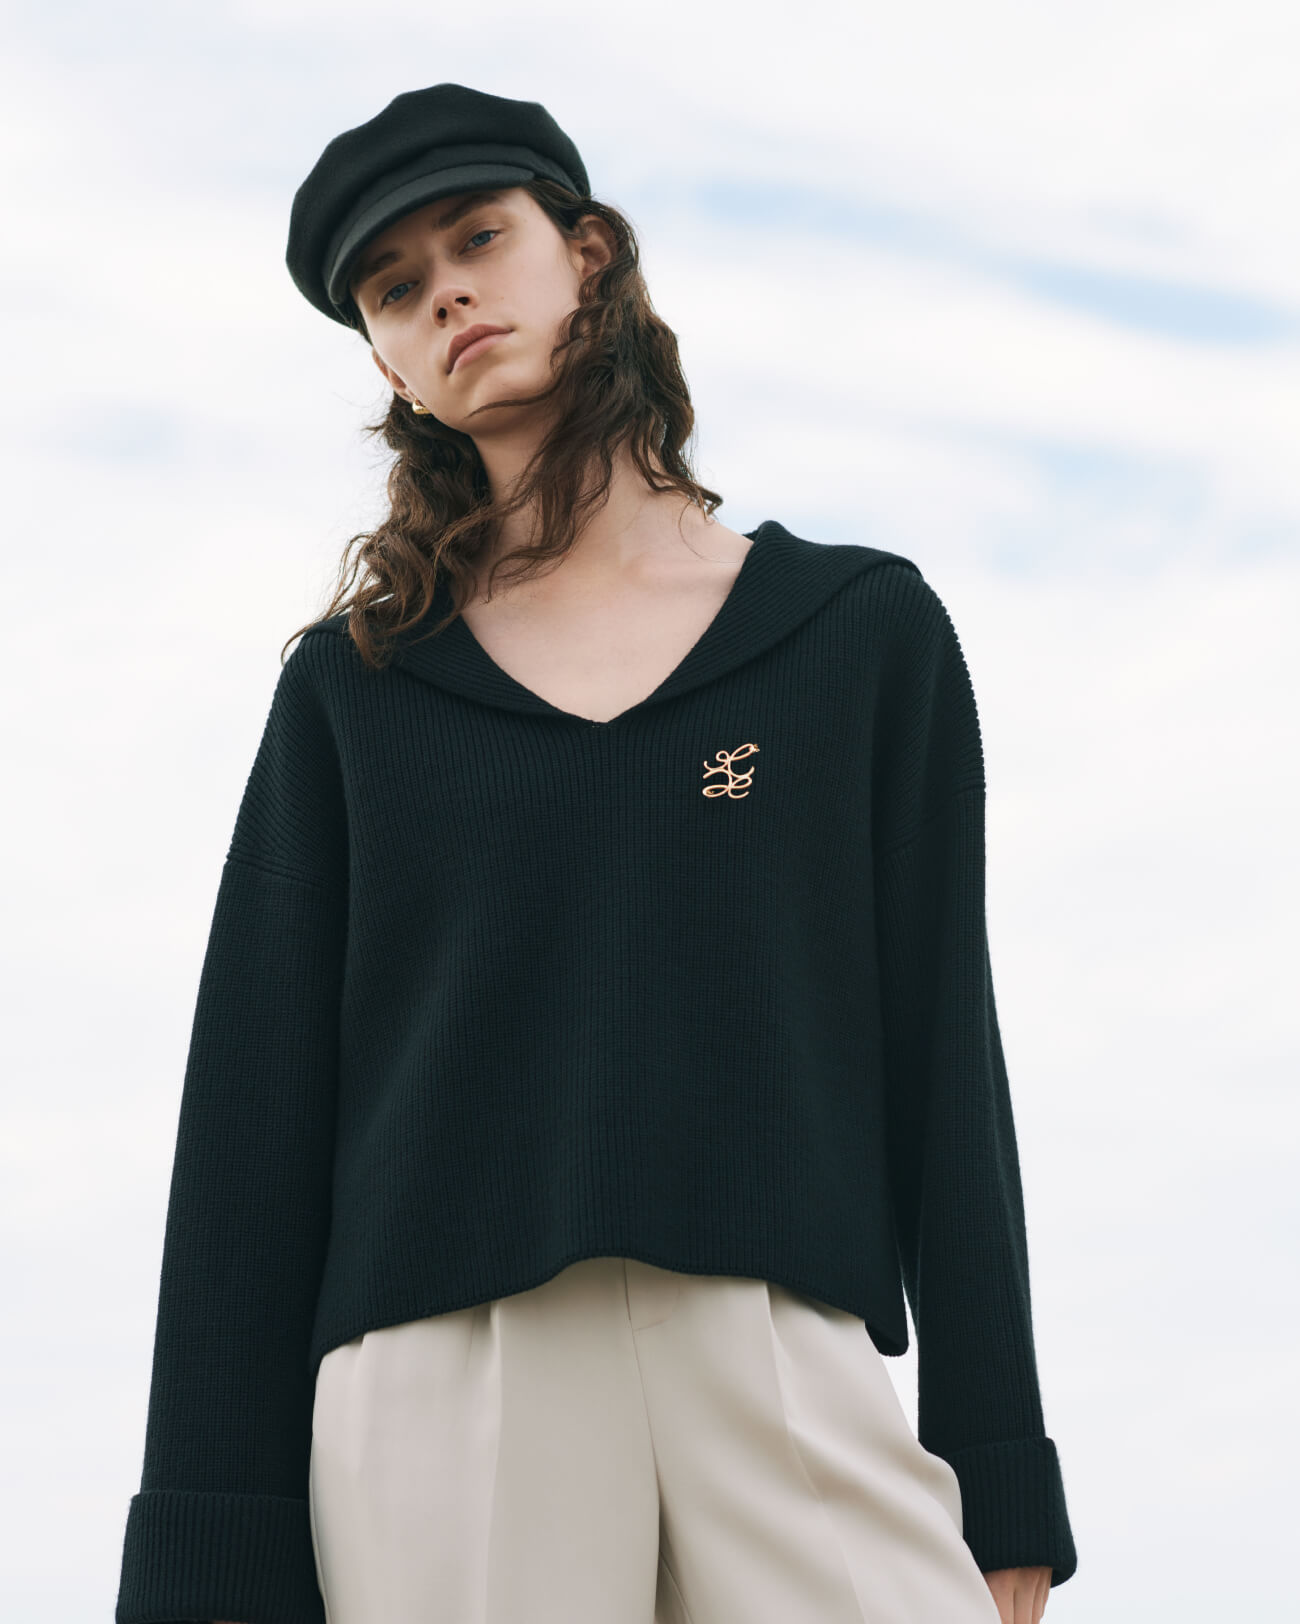 2021 Autumn Winter 1st Collection | SNIDEL（スナイデル）公式サイト